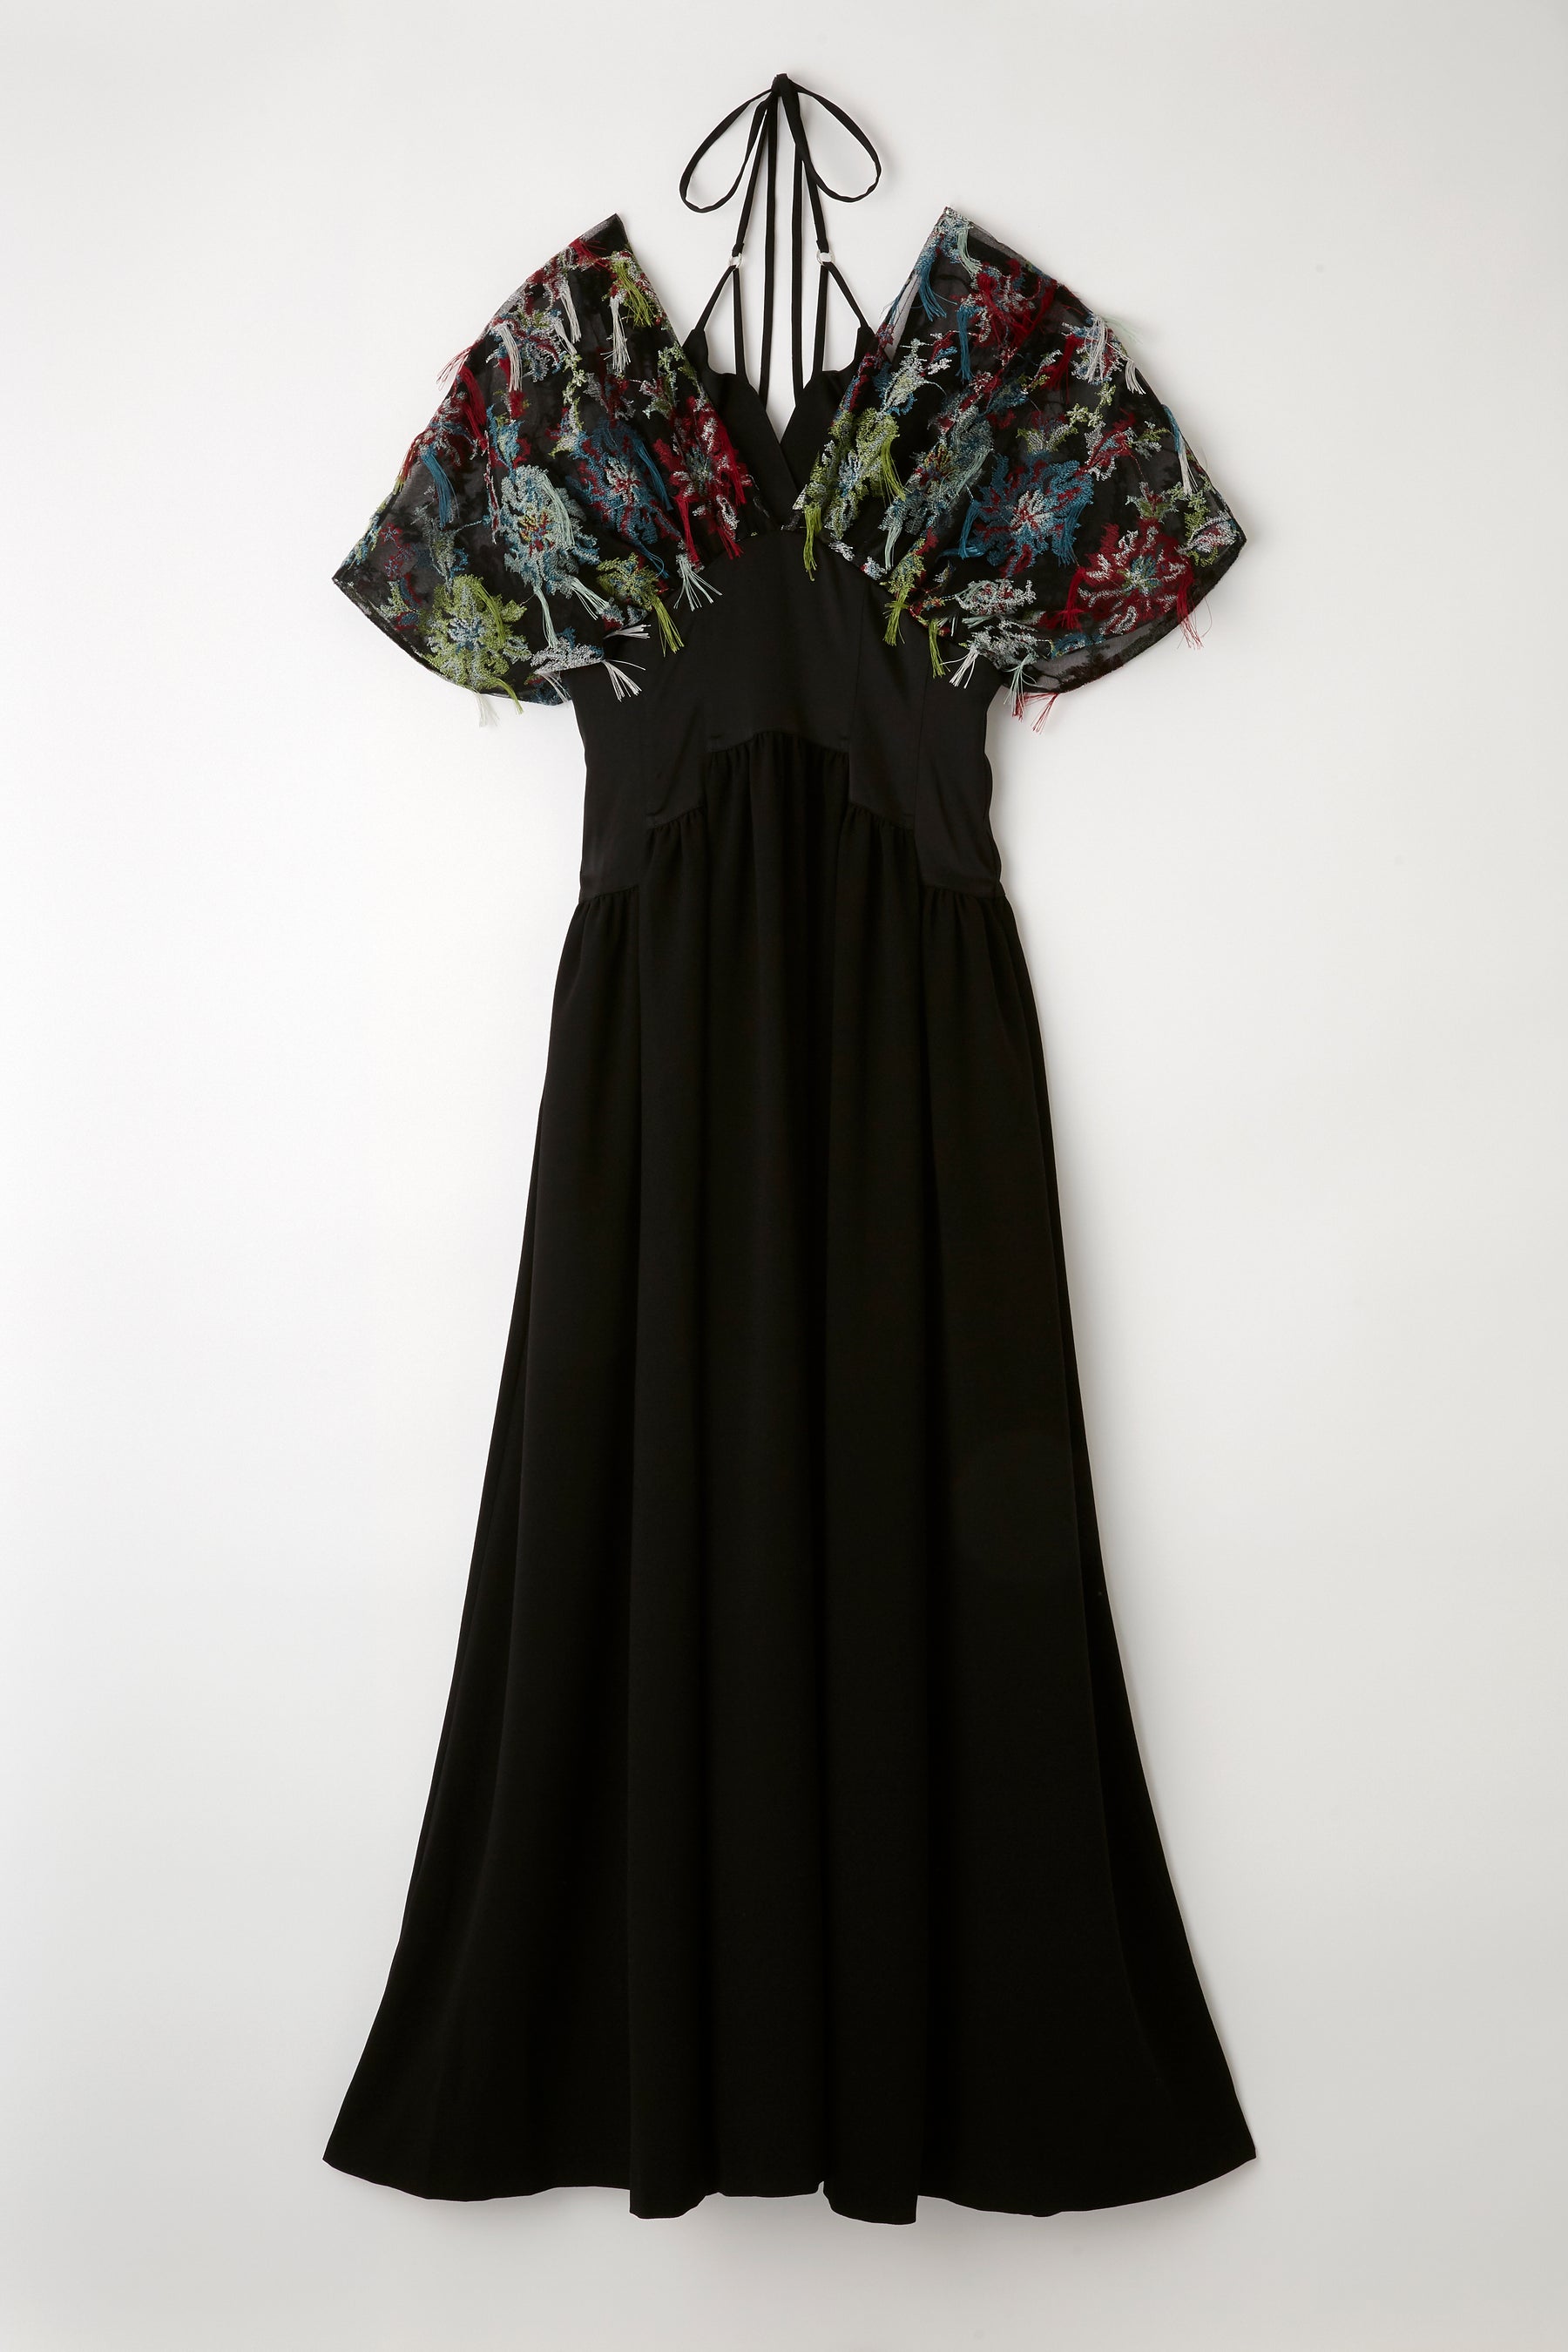 Floating flower lace blooming dress (Black)